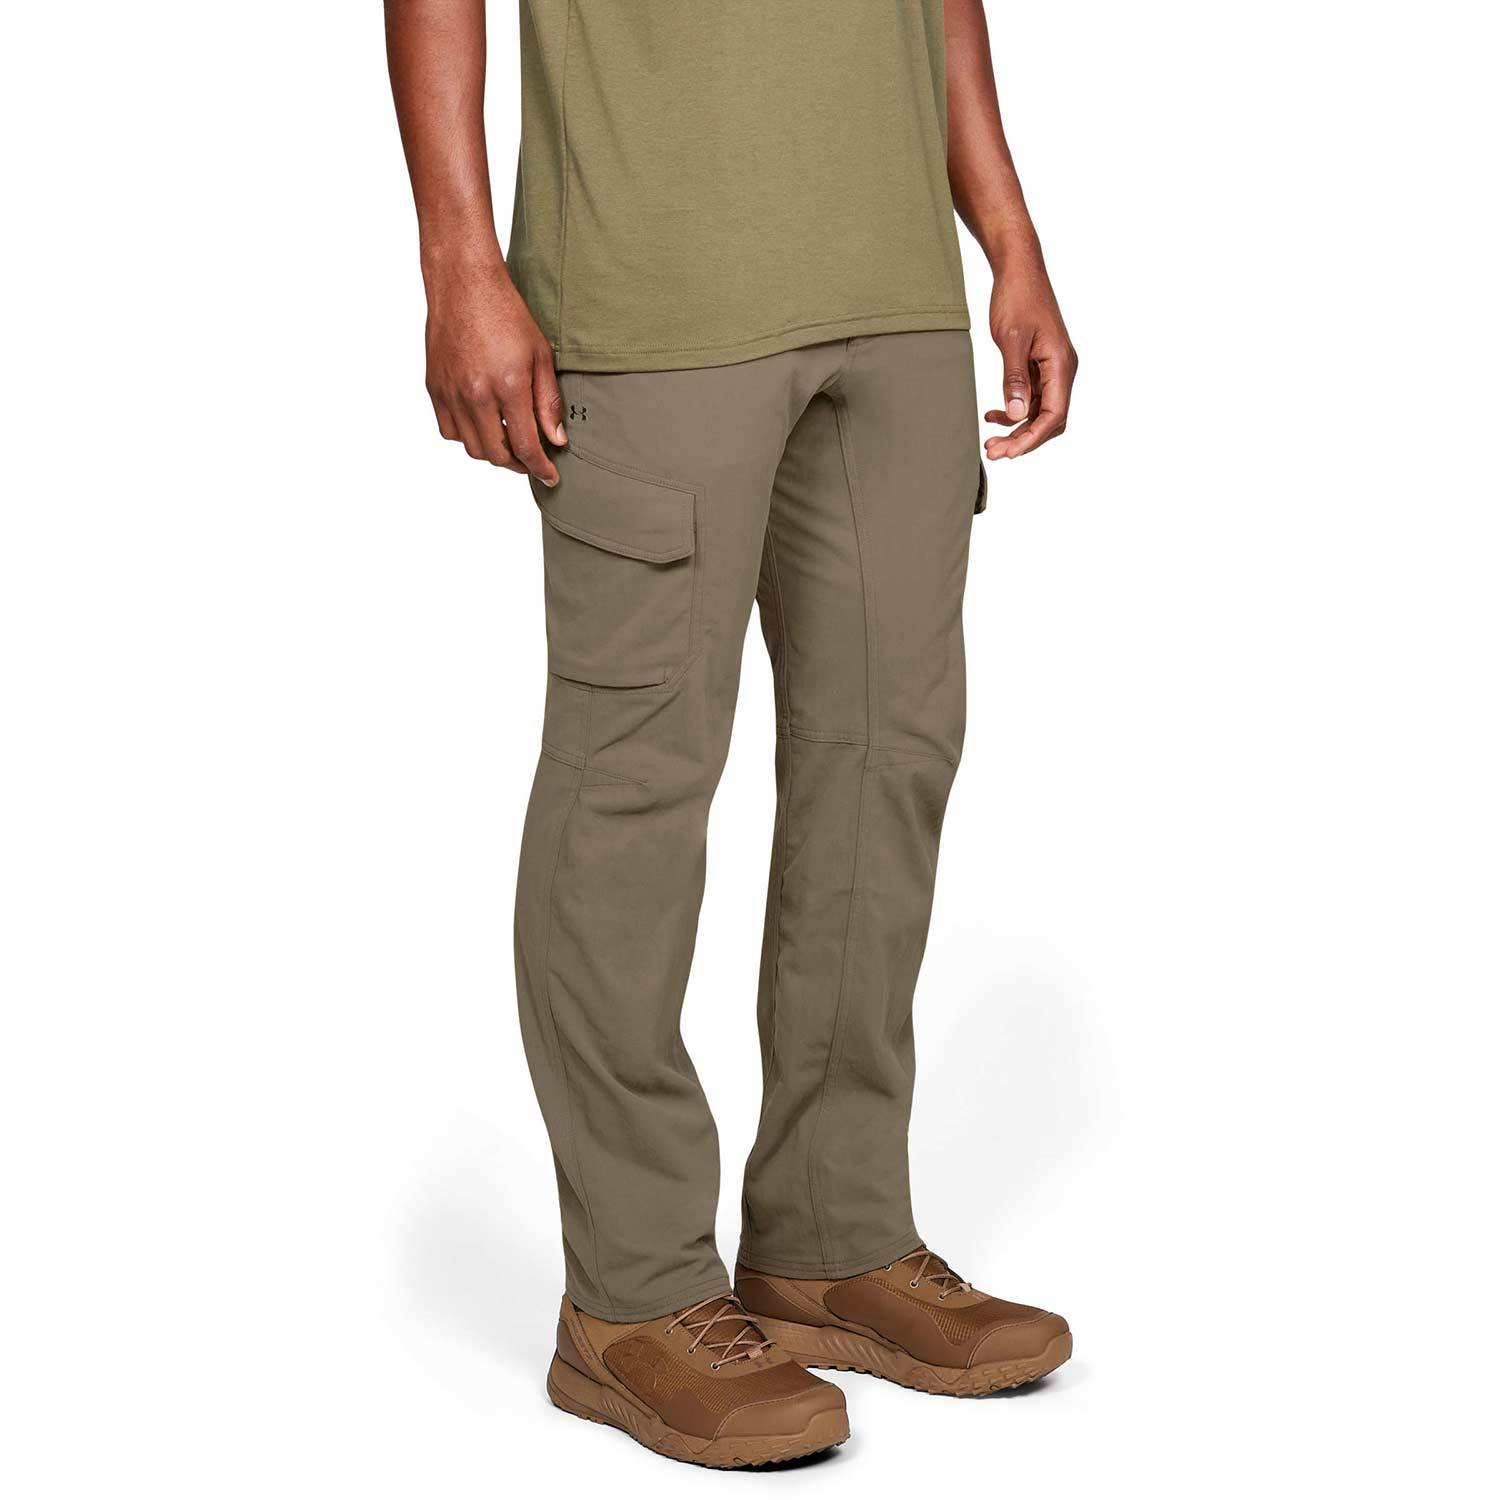 Details about   NEW Under Armour Men's Tactical Adapt Pants Size 42x32 Coyote Brown 1348645 728 